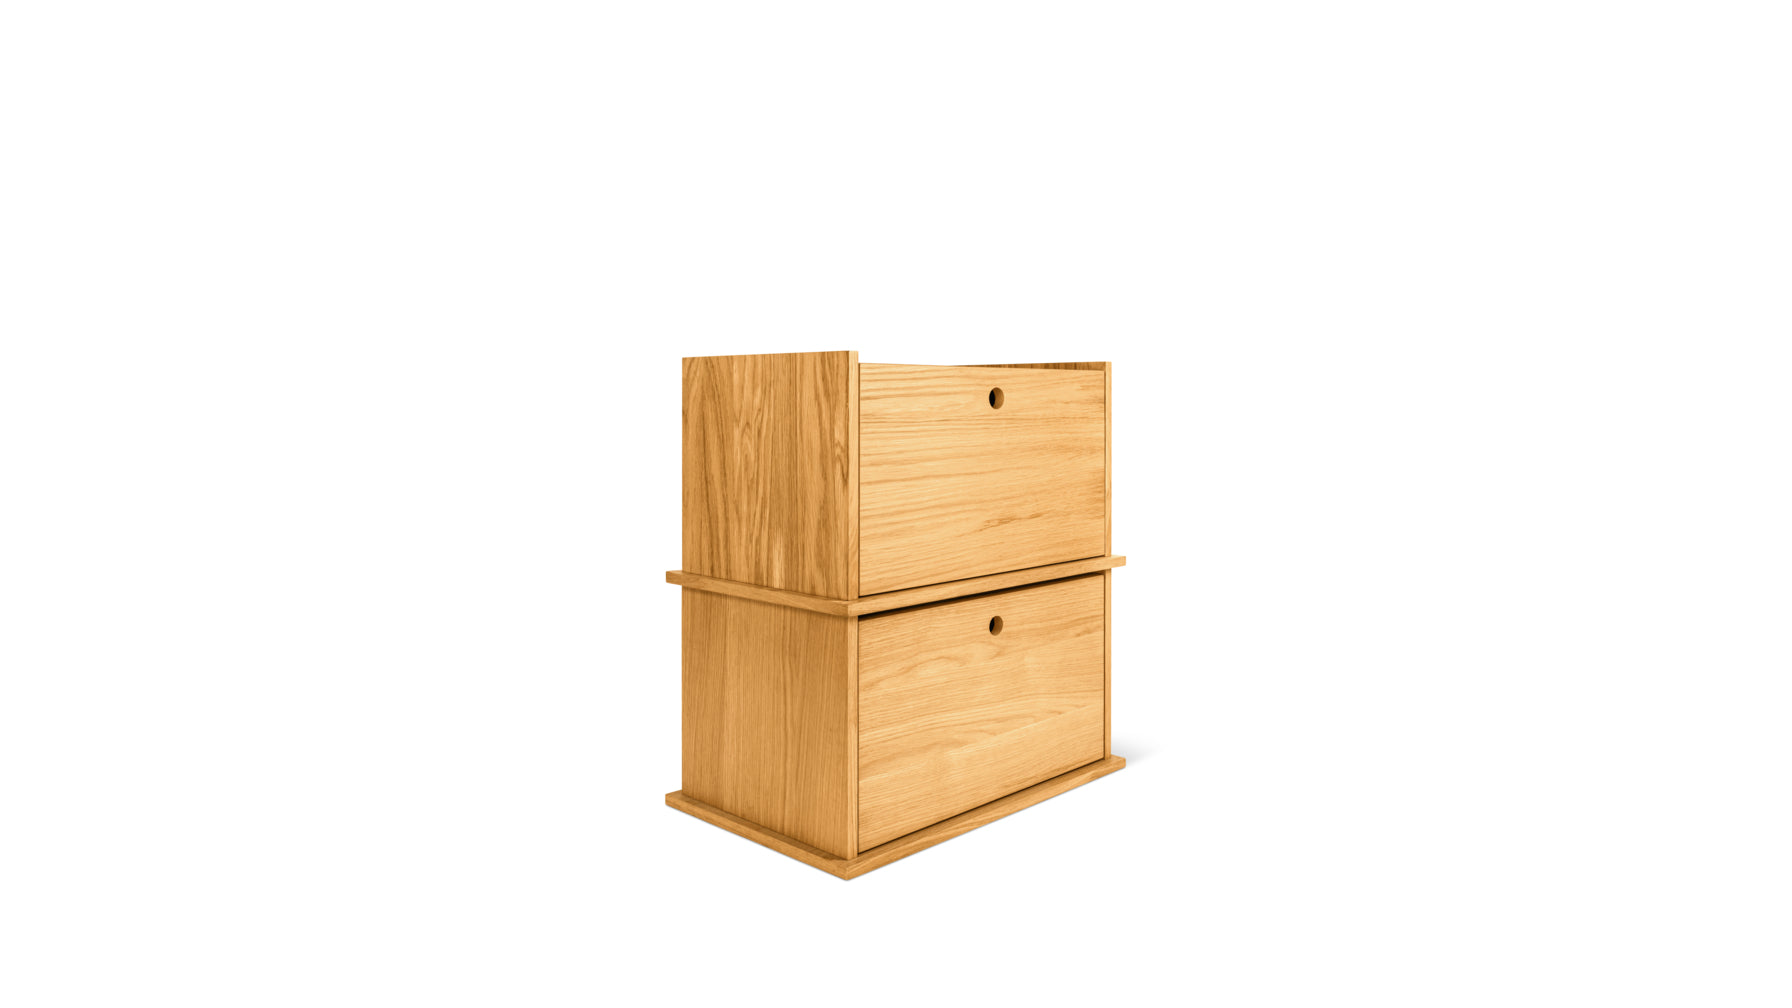 Keep Stacking Storage System 2-Piece, Closed, Oak - Image 10